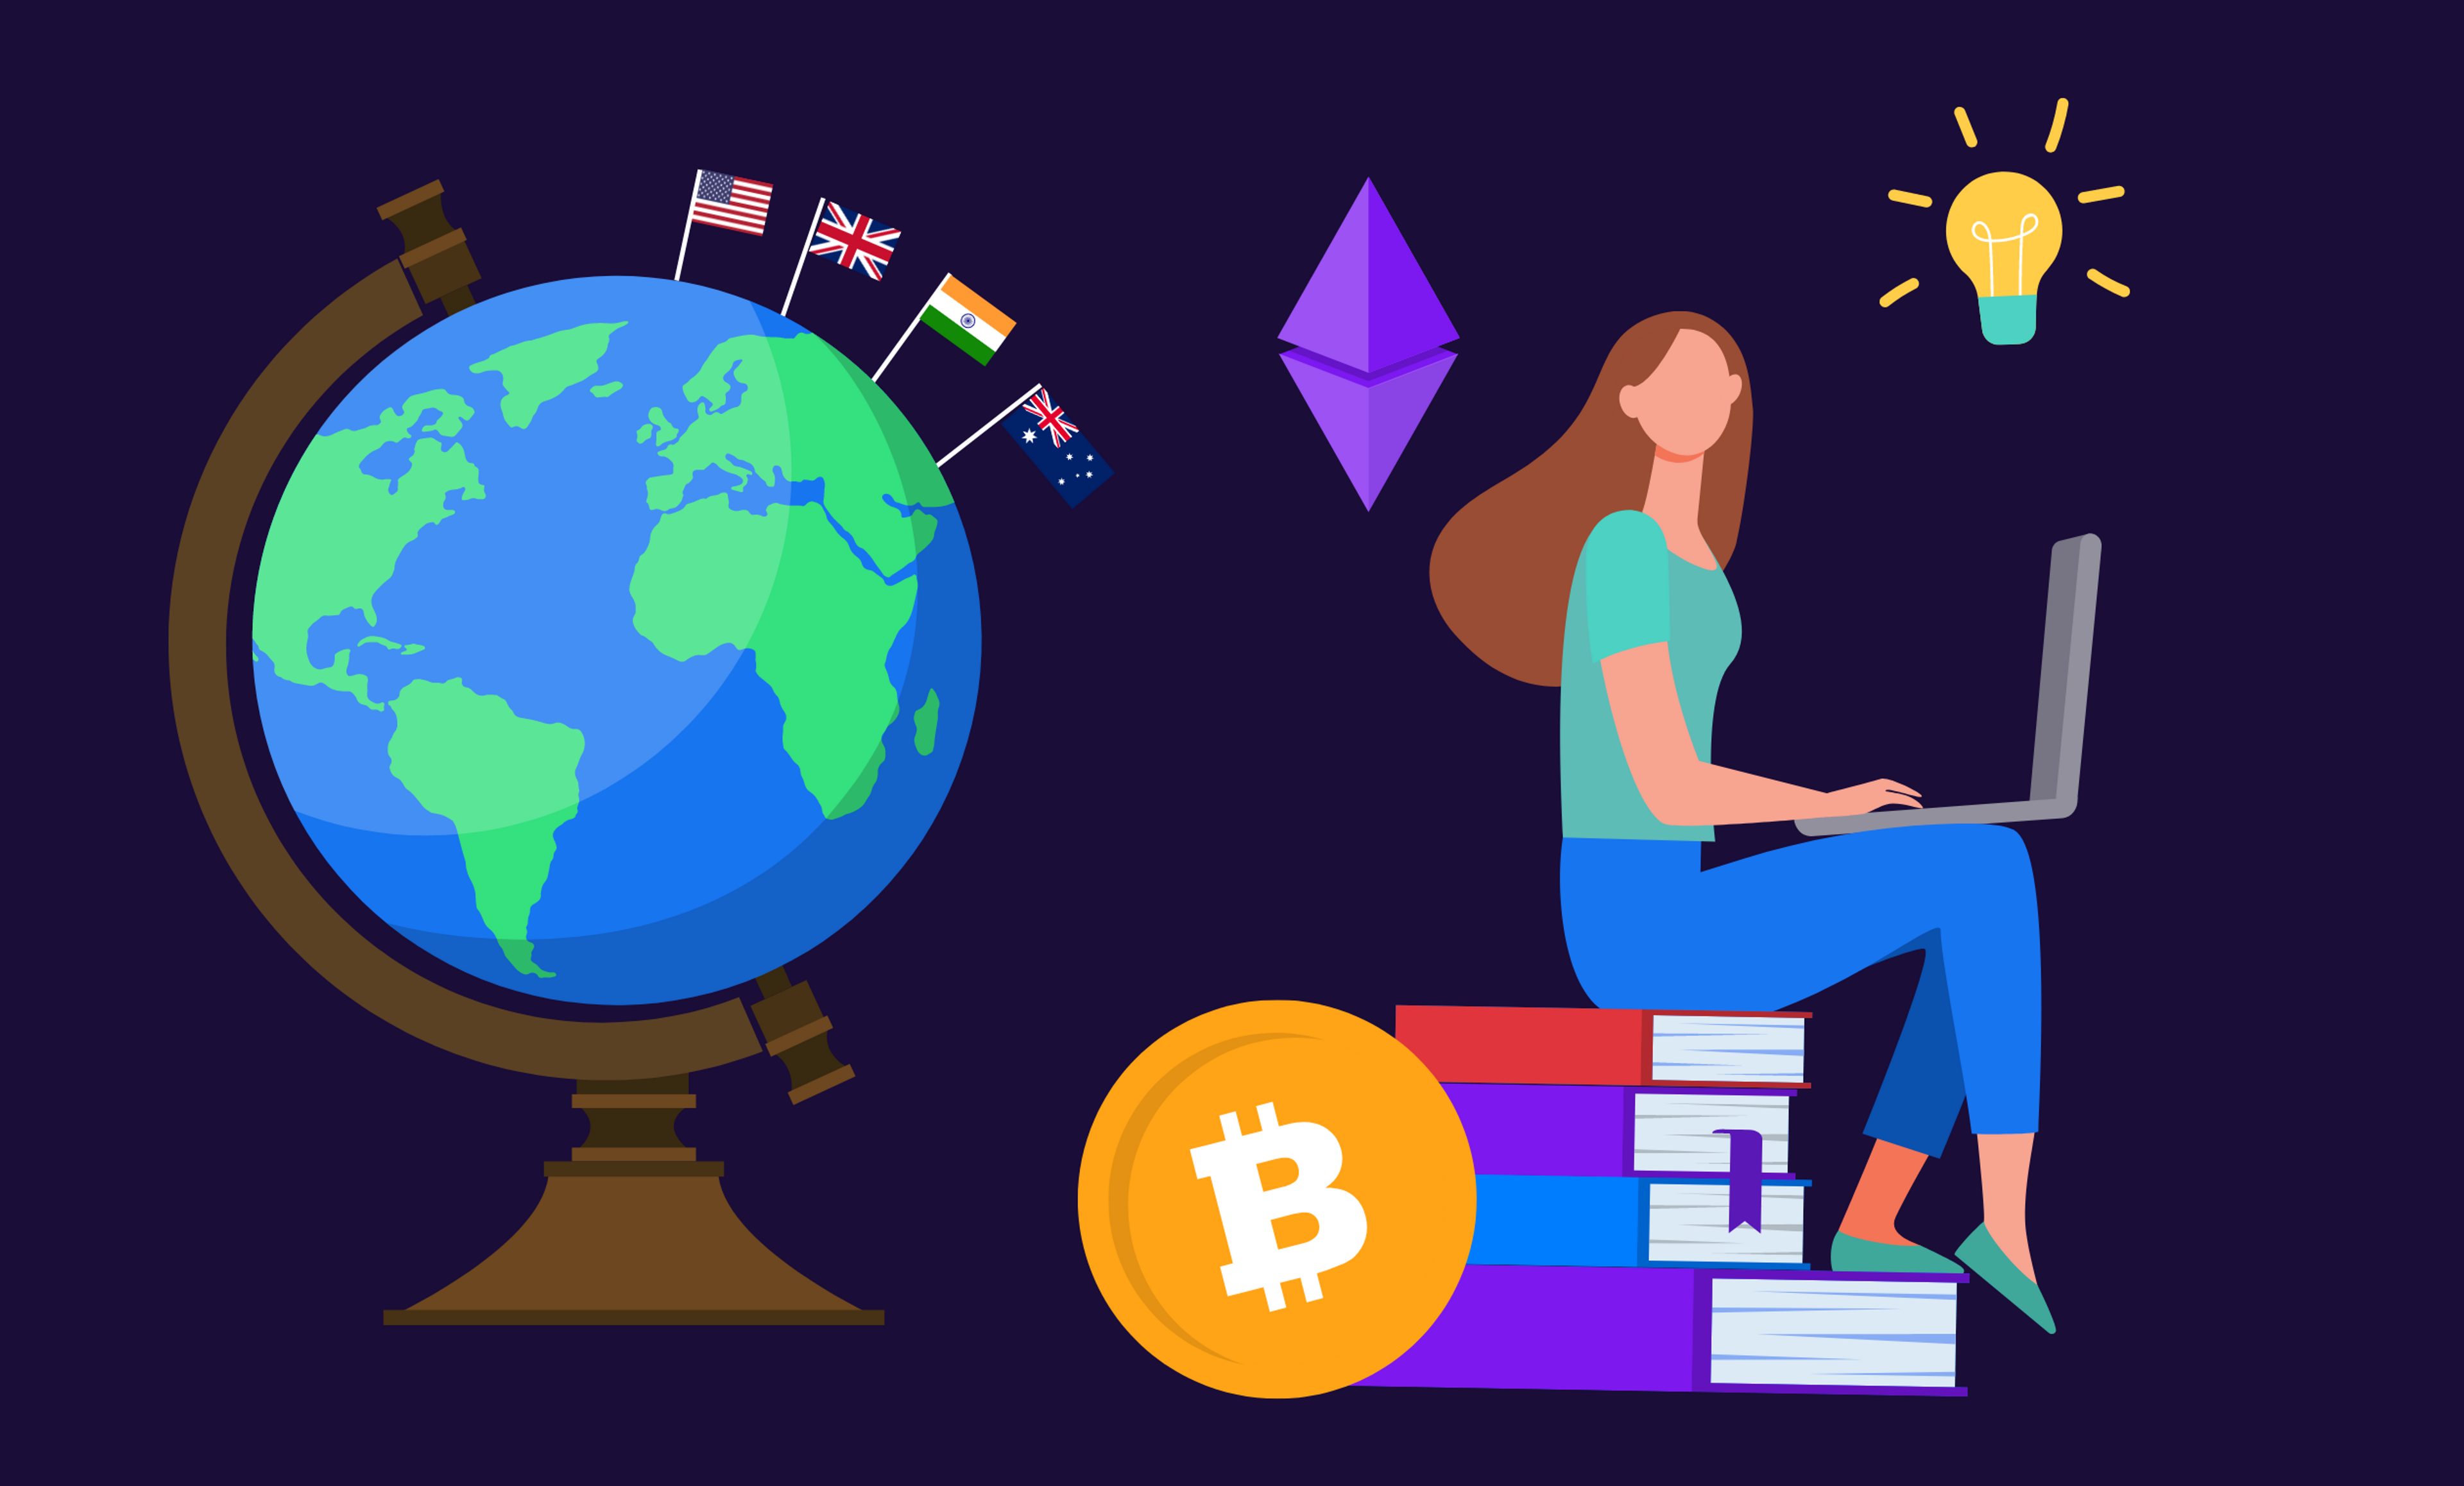 Crypto-curiosity: Which country's accountants are showing the most interest in up-skilling?